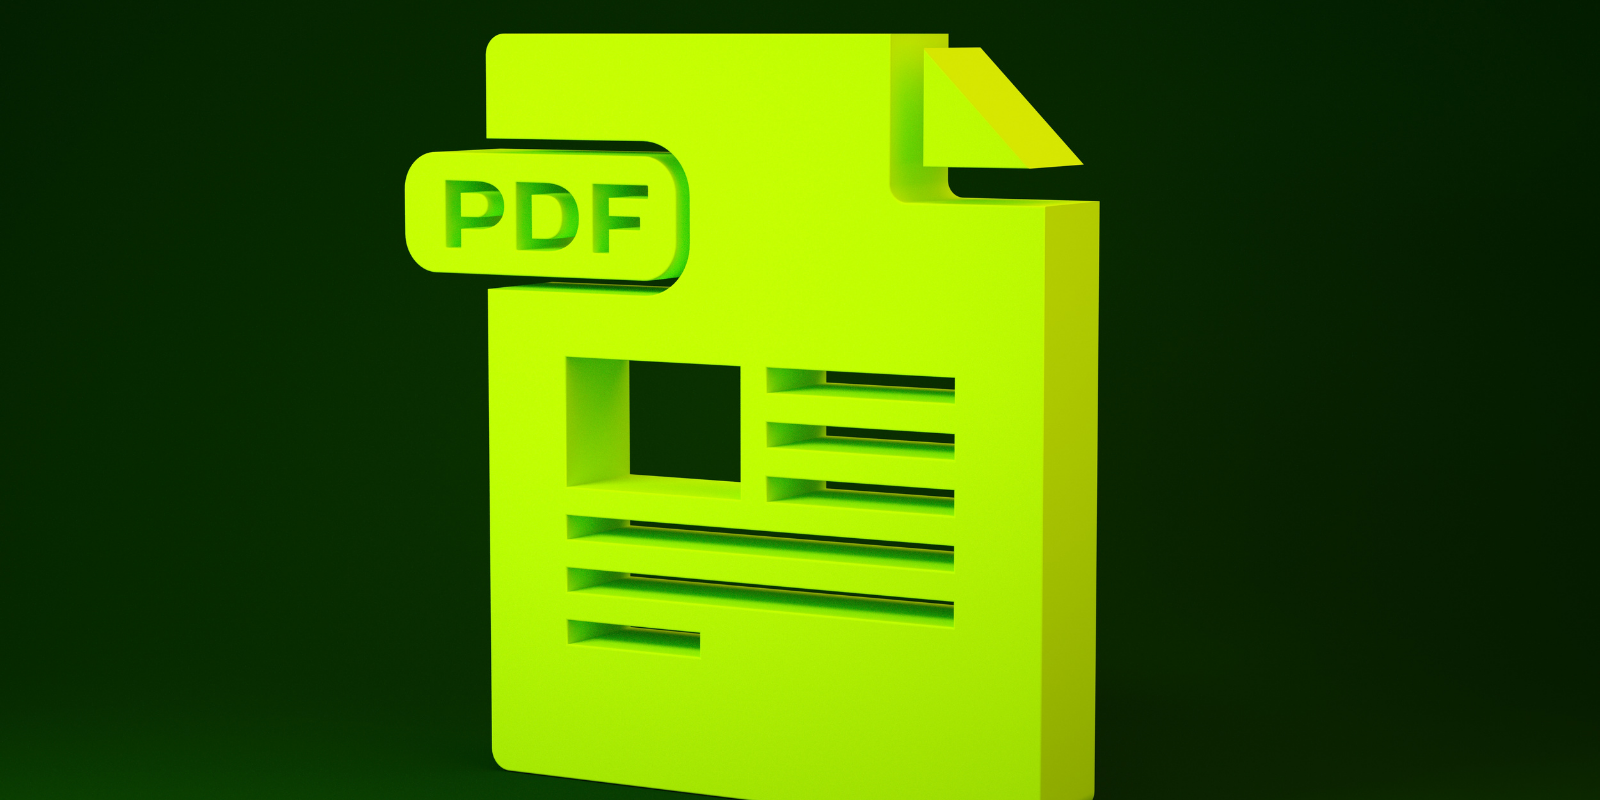 PDF vulnerable to Attack